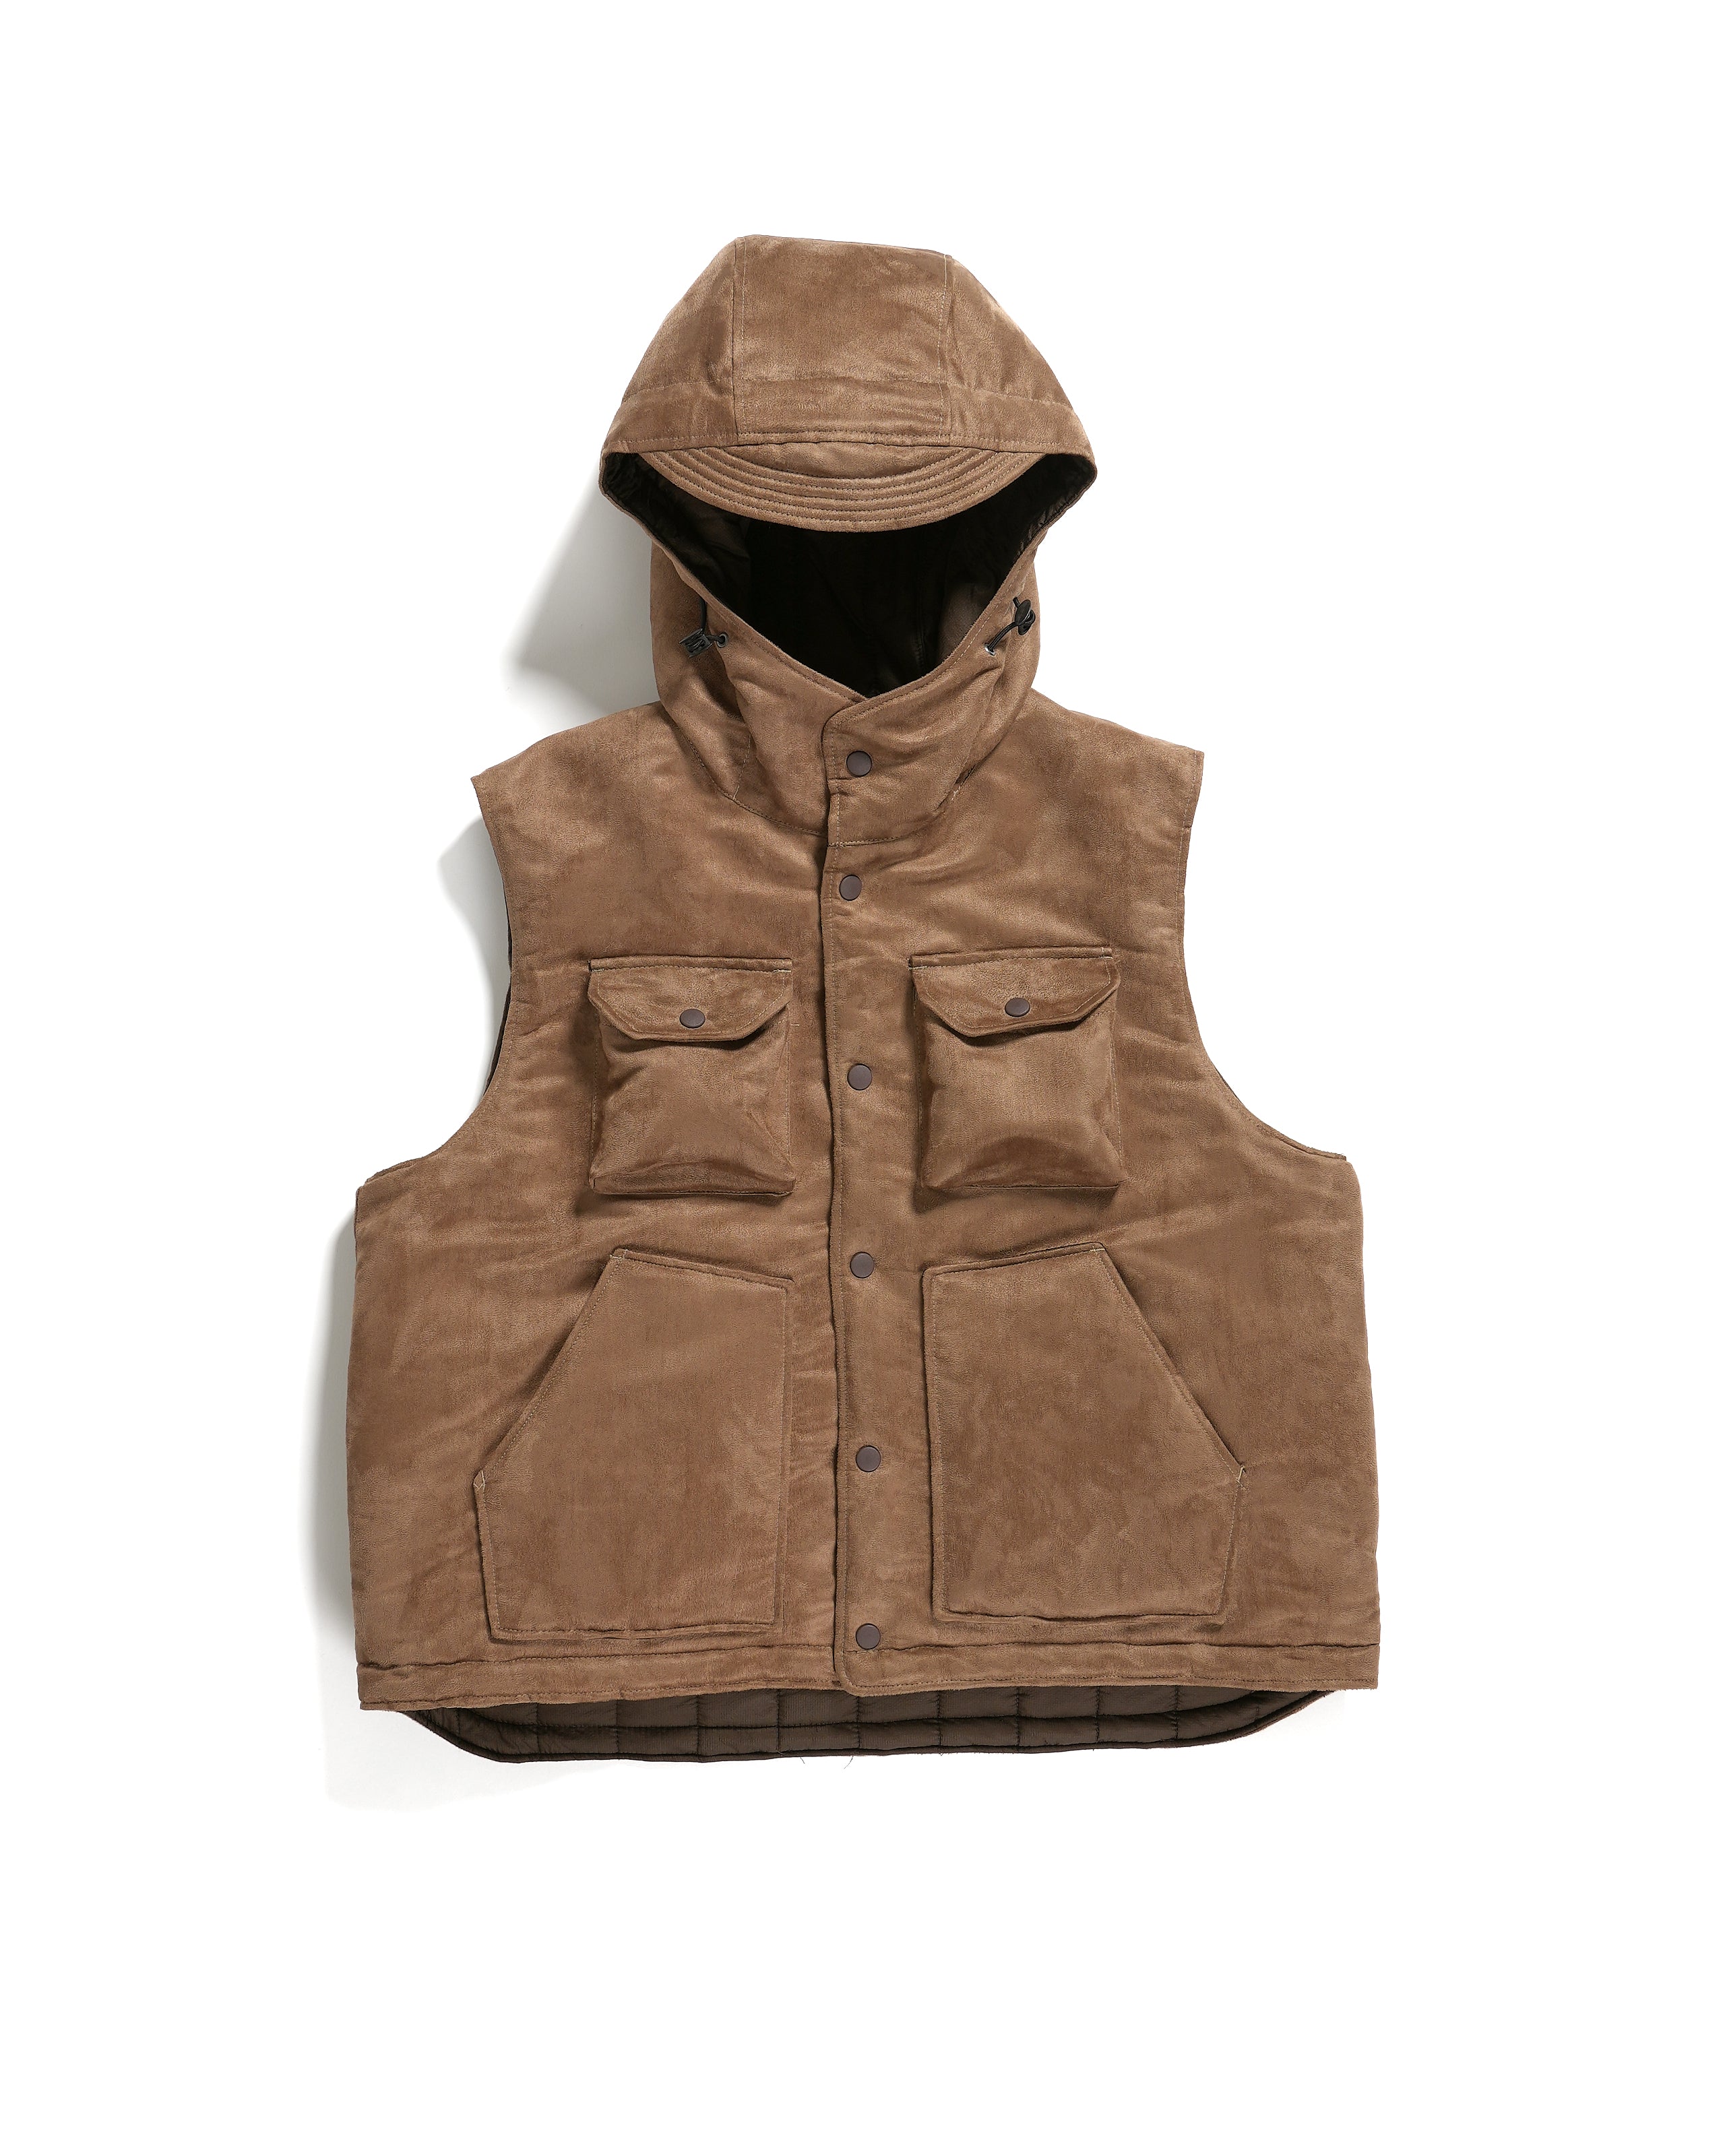 Field Vest - Khaki Polyester Fake Suede